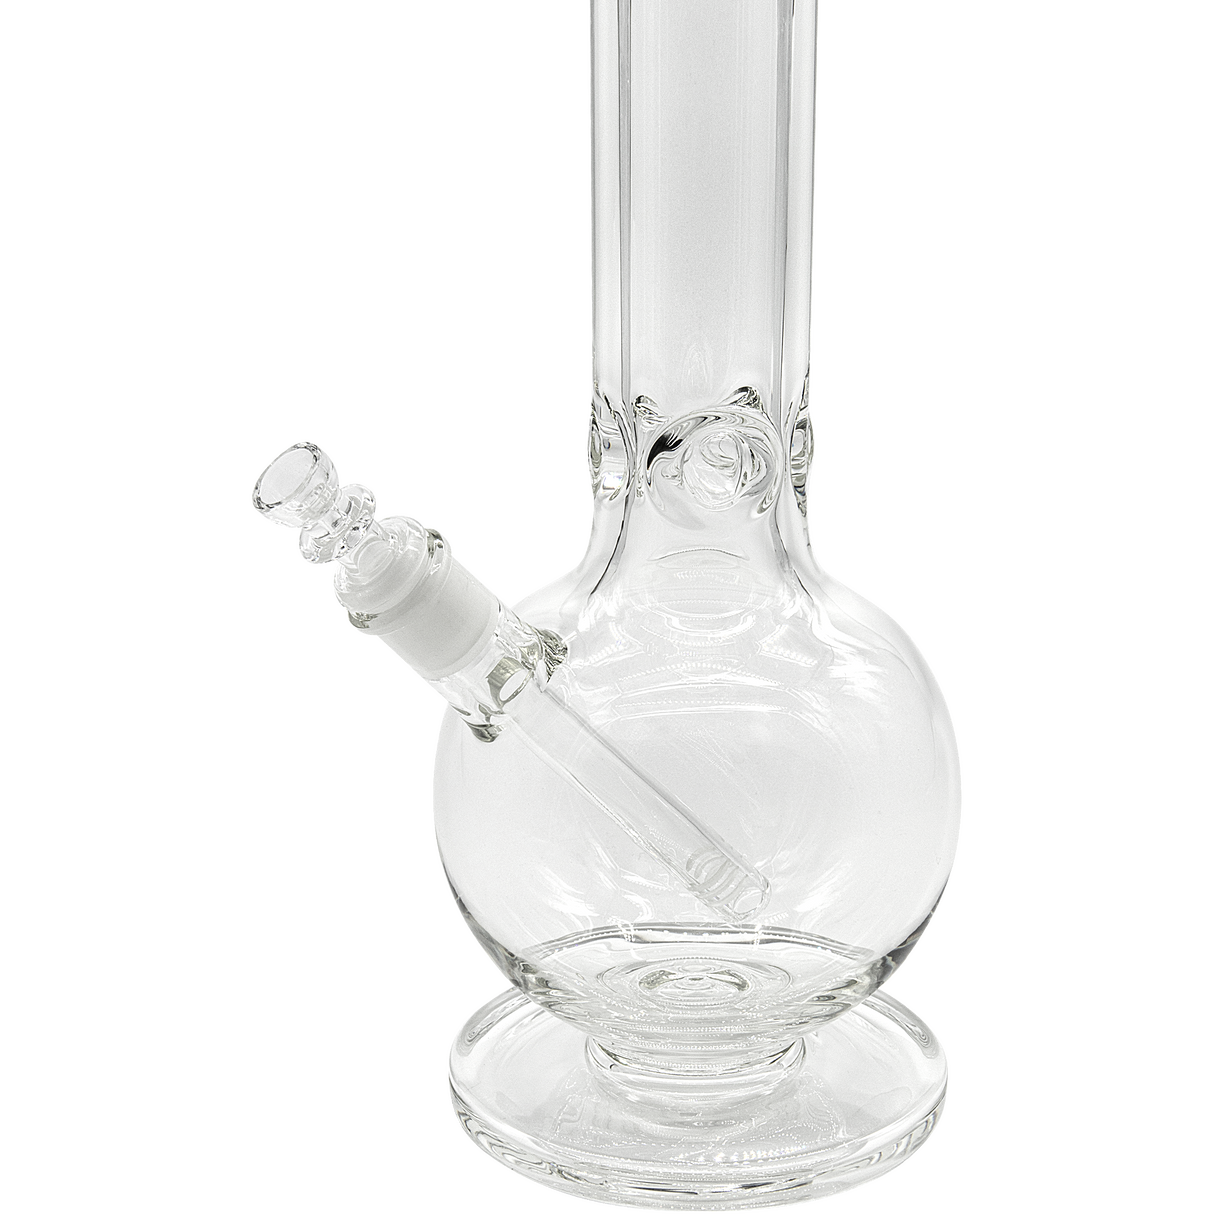 LA Pipes "Bazooka" 9mm Thick Glass Bong - 18" Height with Bubble Design - Front View